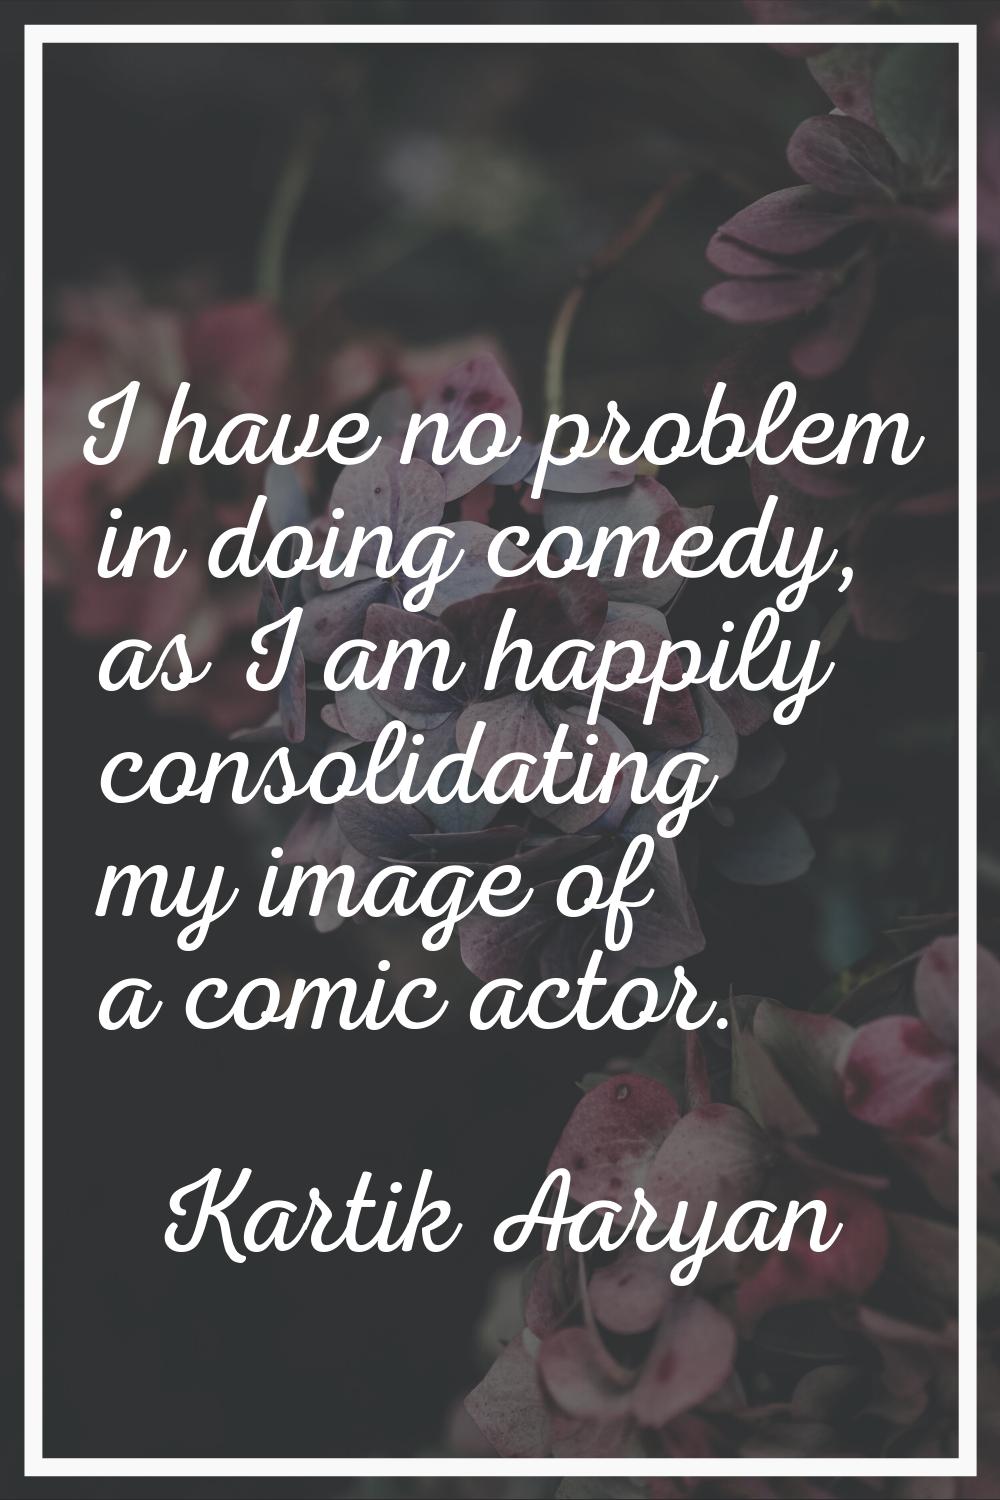 I have no problem in doing comedy, as I am happily consolidating my image of a comic actor.